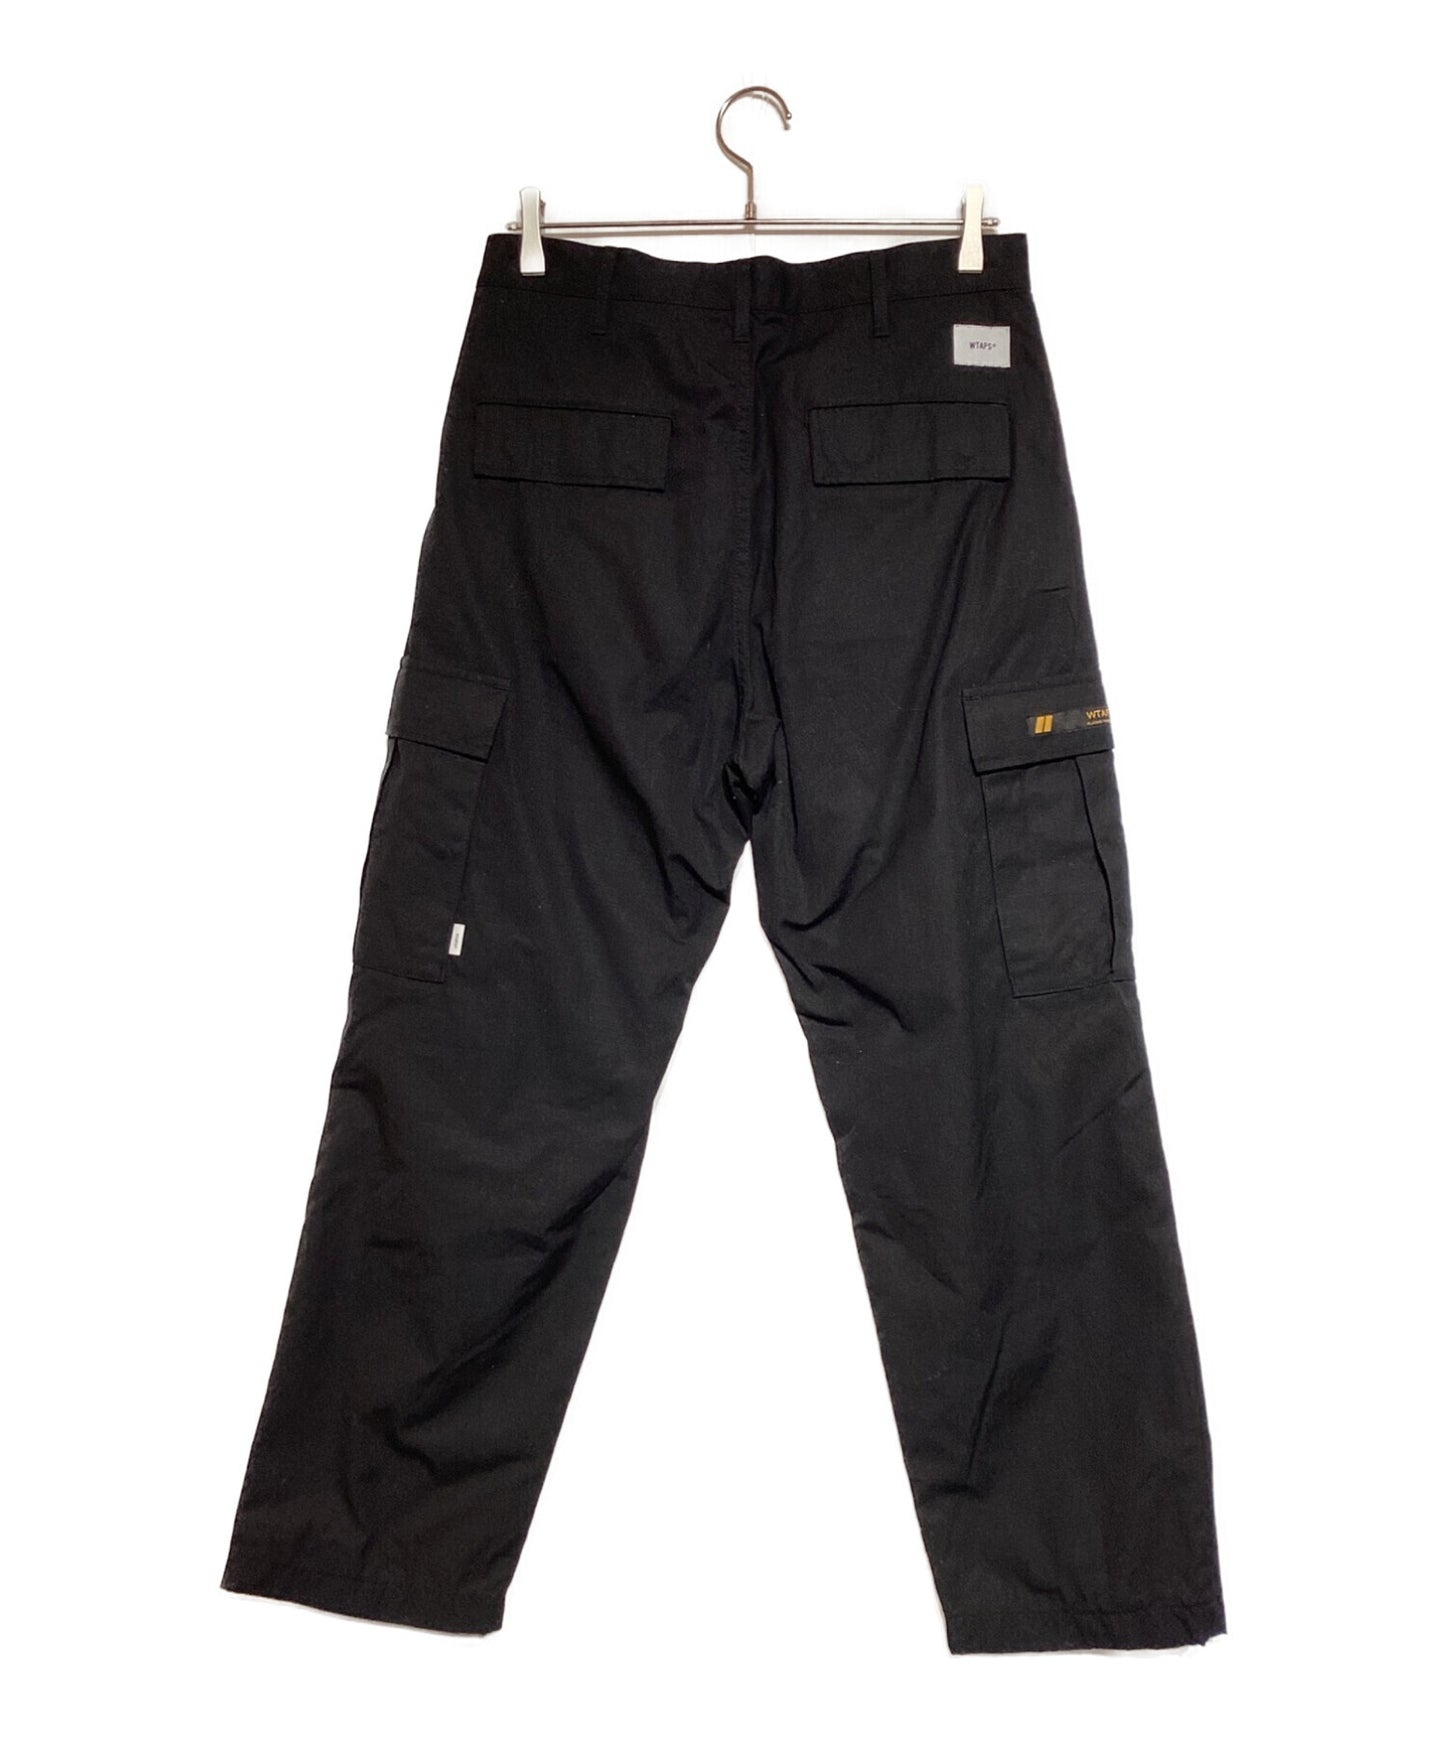 [Pre-owned] WTAPS JUNGLE STOCK TROUSERS COTTON RIPSTOP 211wvdt-ptm02